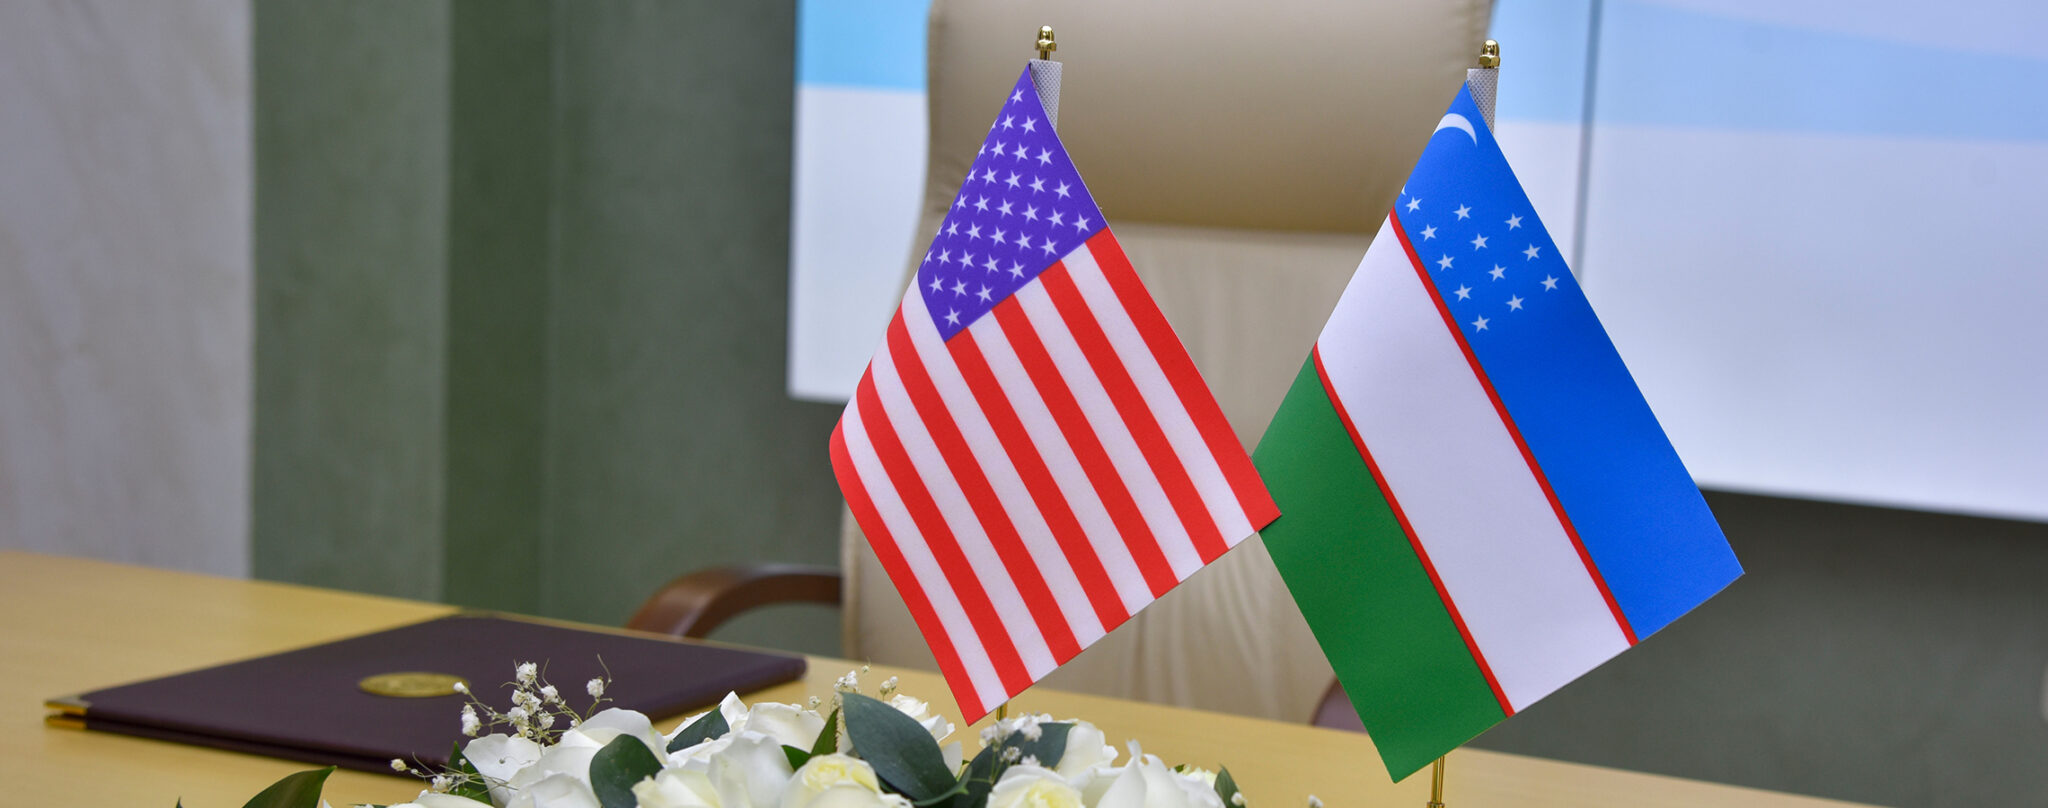 U.S.-Uzbekistan partnership thrives: key agreements and collaborations forged in strategic dialogue 